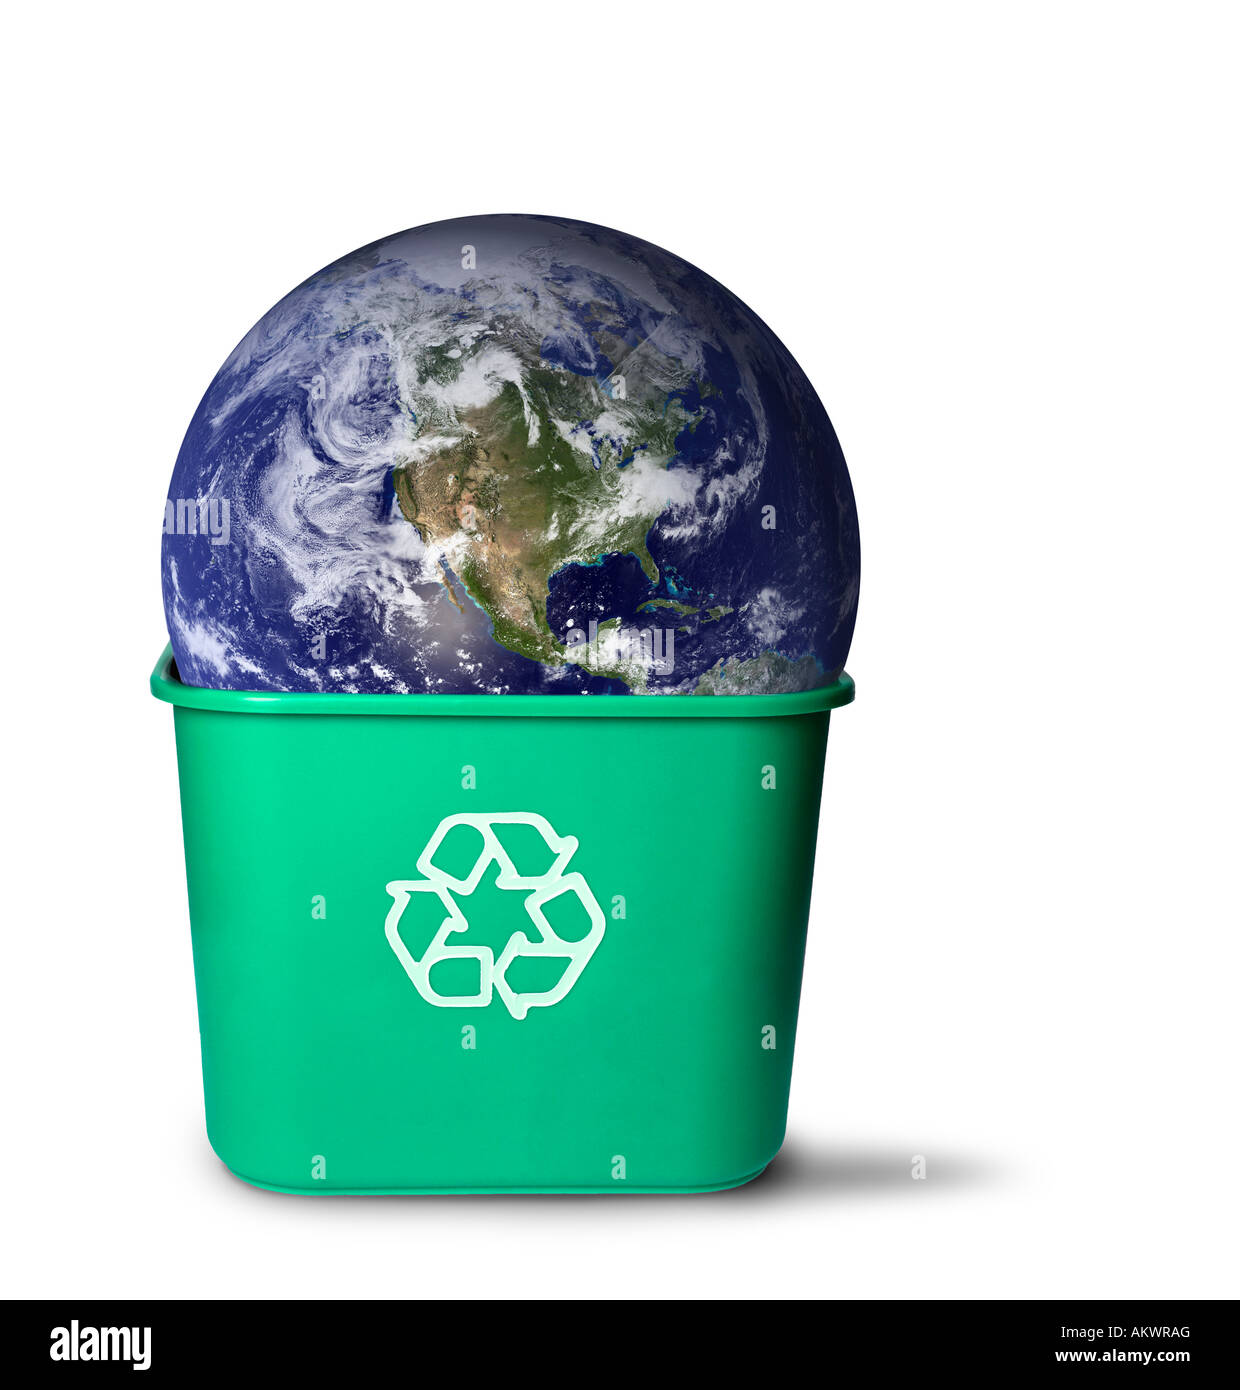 Earth in a recycle bin cut out on white background Stock Photo